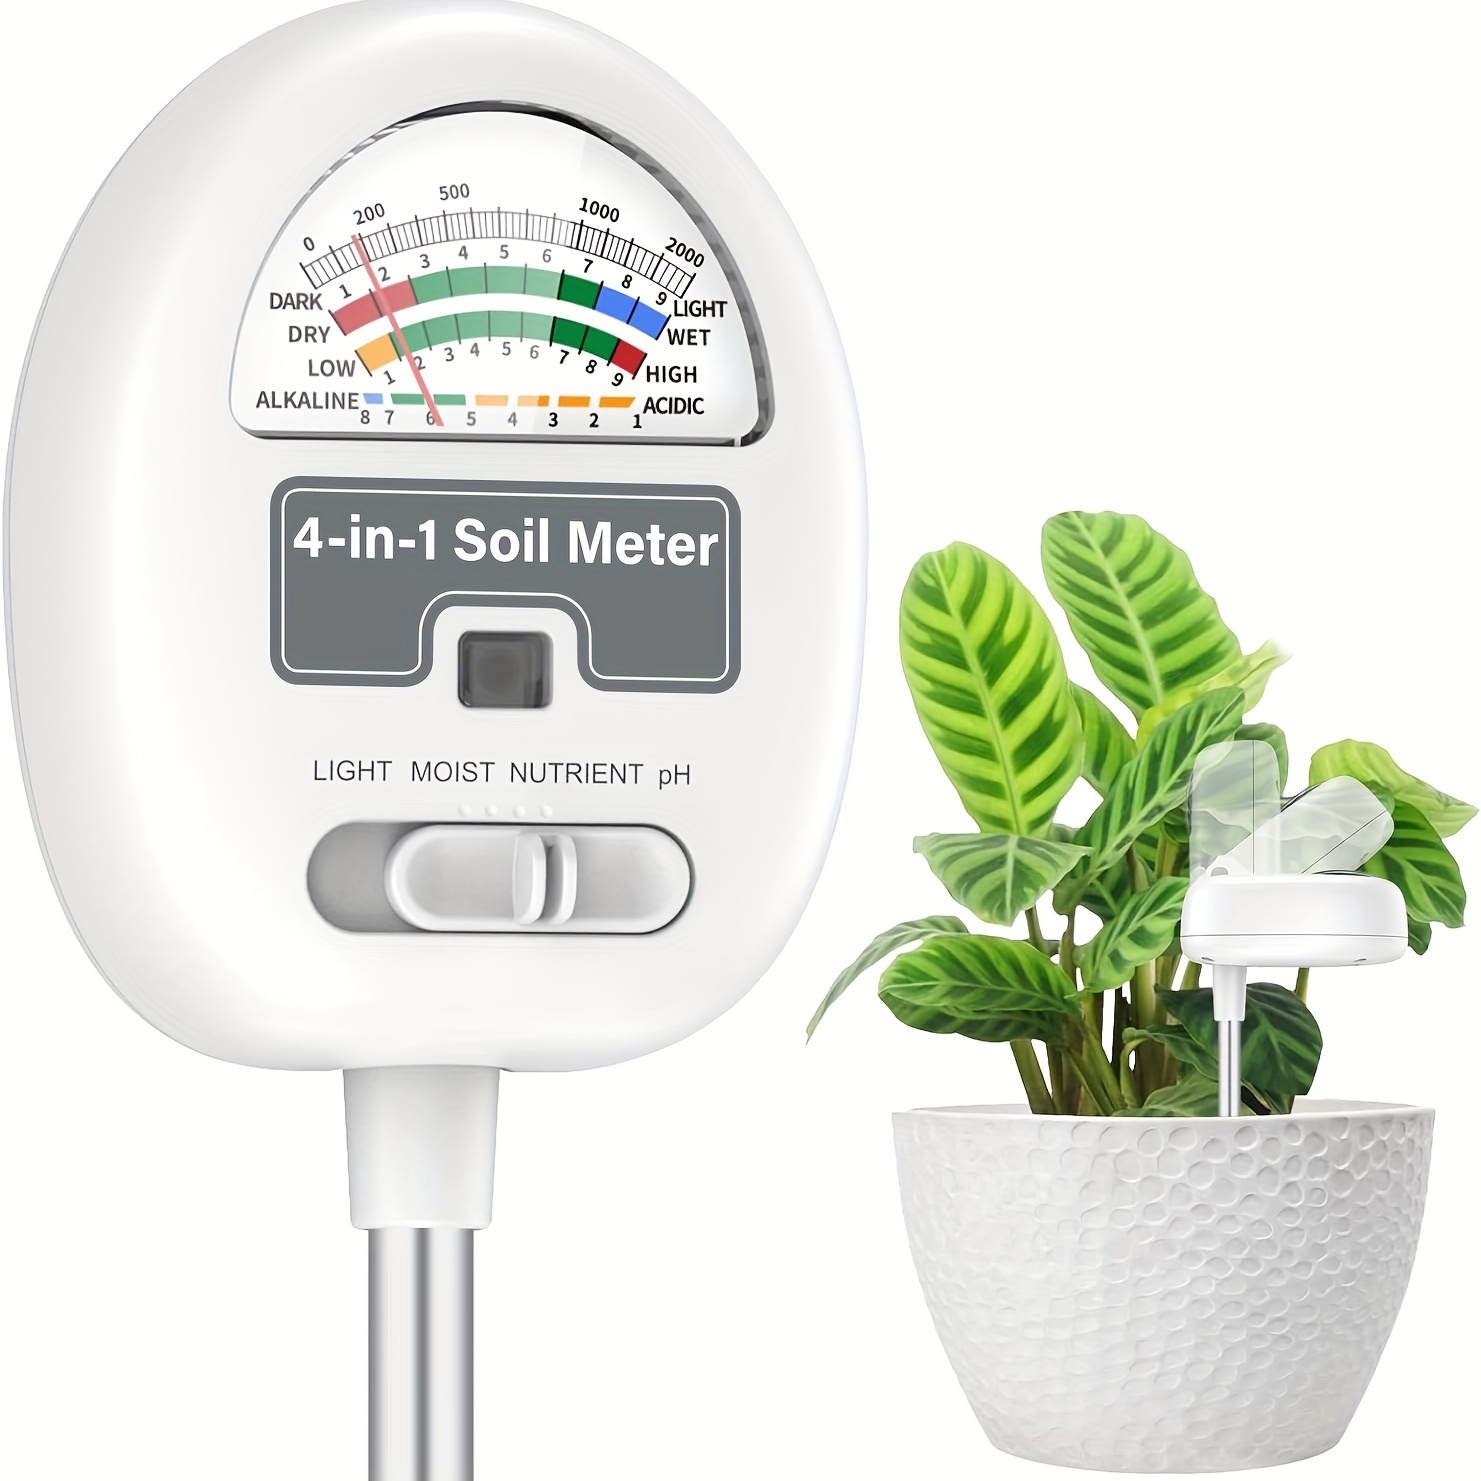 

4-in-1 Soil Health Tester - Moisture, Ph, Nutrients & Light Monitor For Gardening, Lawns & Farms - Battery-free Operation